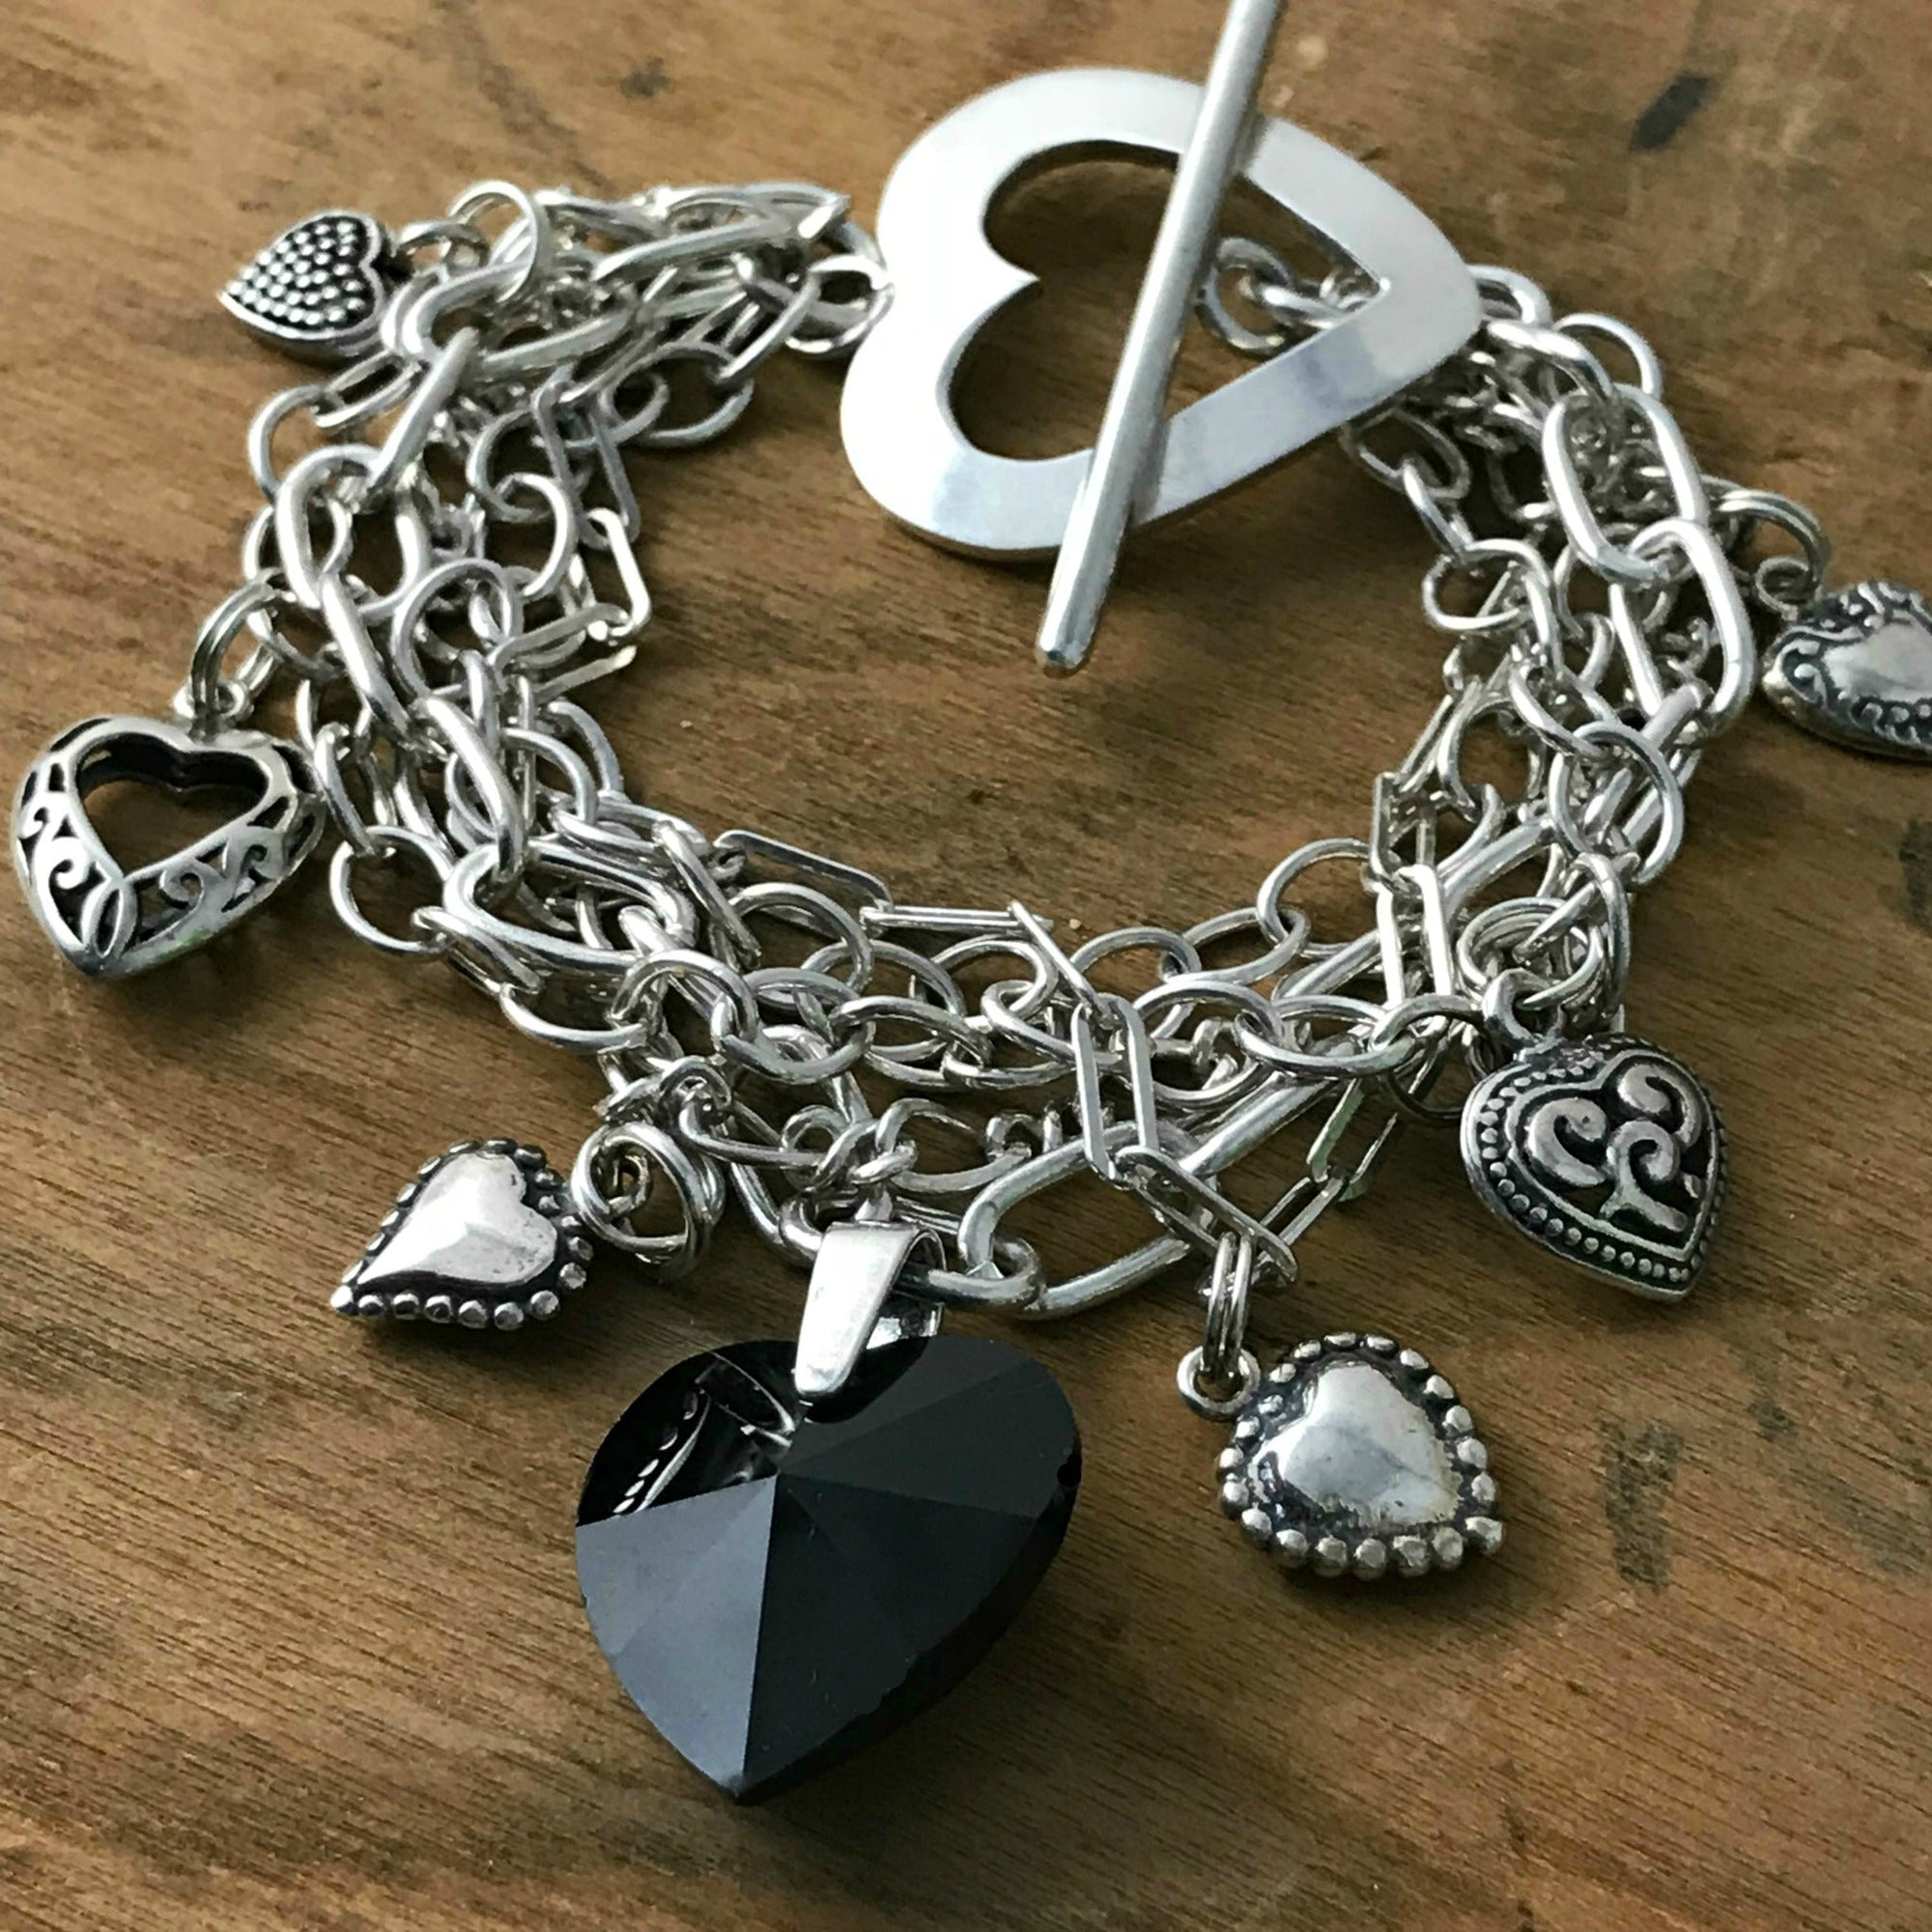 Suzie Q Studio -- Multi-strand sterling silver chain and charm bracelet. This sterling silver, multi-strand charm bracelet has a black Swarovski crystal heart focal charm, combined with sterling silver chain, charms and spectacular sterling silver, heart-shaped toggle-style clasp. 